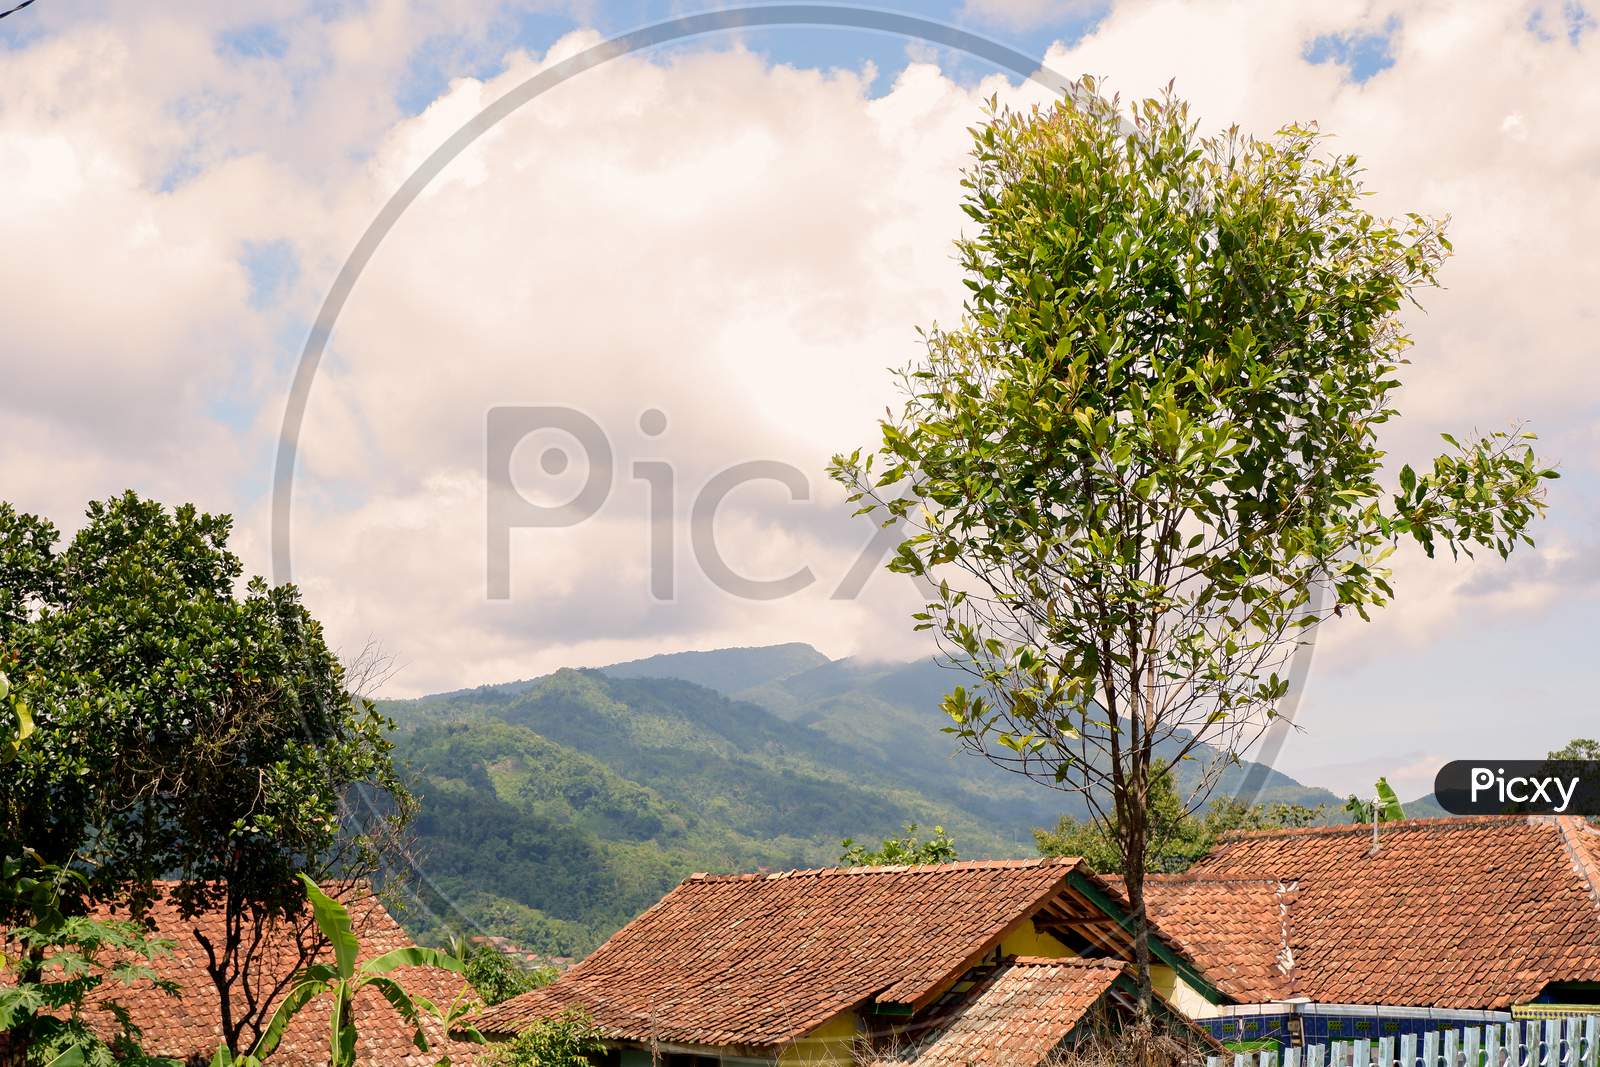 Atmosphere In The Countryside With A Background Of Clouds And Green Mountains